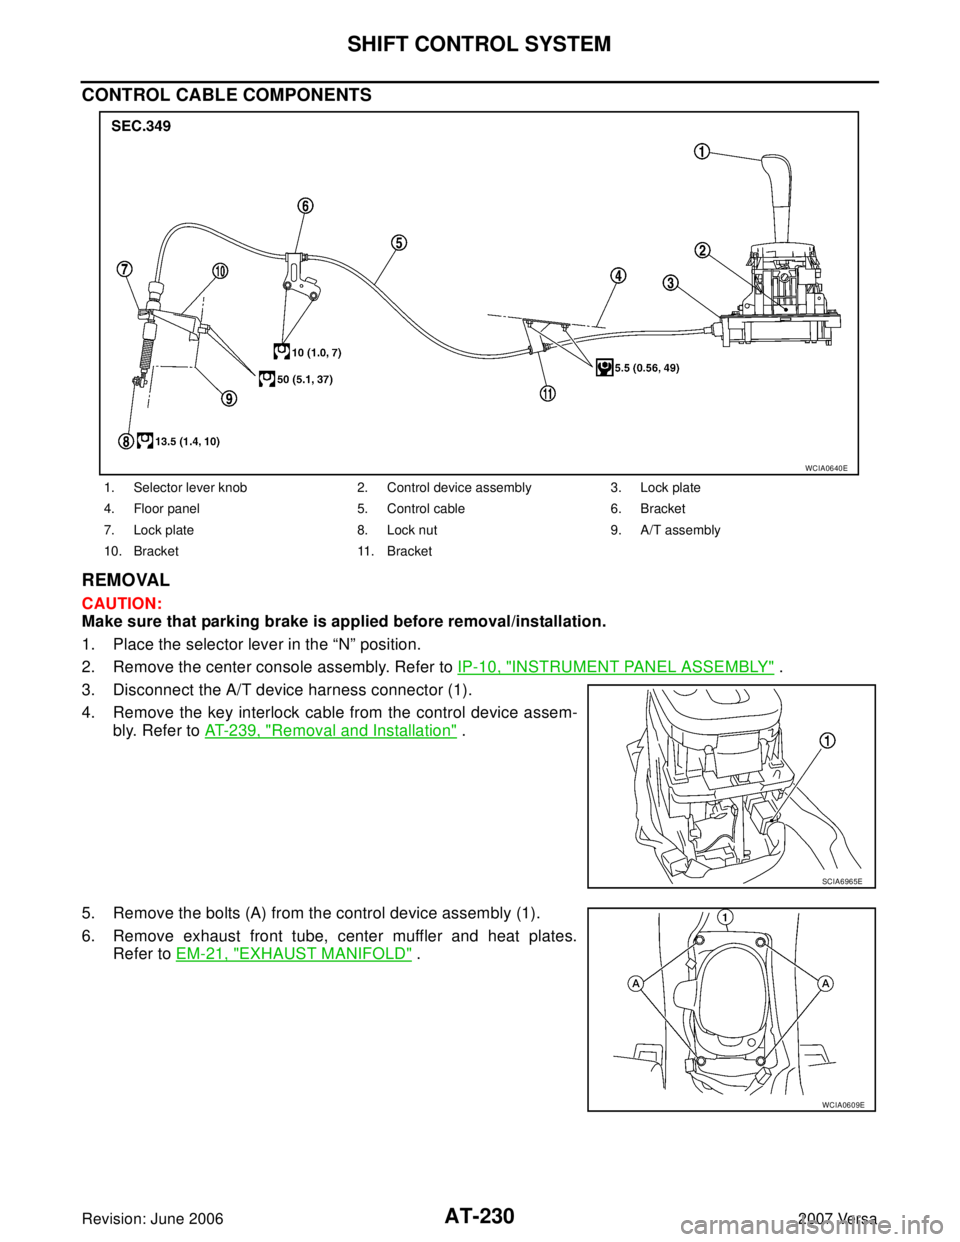 NISSAN TIIDA 2007  Service Repair Manual AT-230
SHIFT CONTROL SYSTEM
Revision: June 20062007 Versa
CONTROL CABLE COMPONENTS
REMOVAL
CAUTION:
Make sure that parking brake is applied before removal/installation.
1. Place the selector lever in 